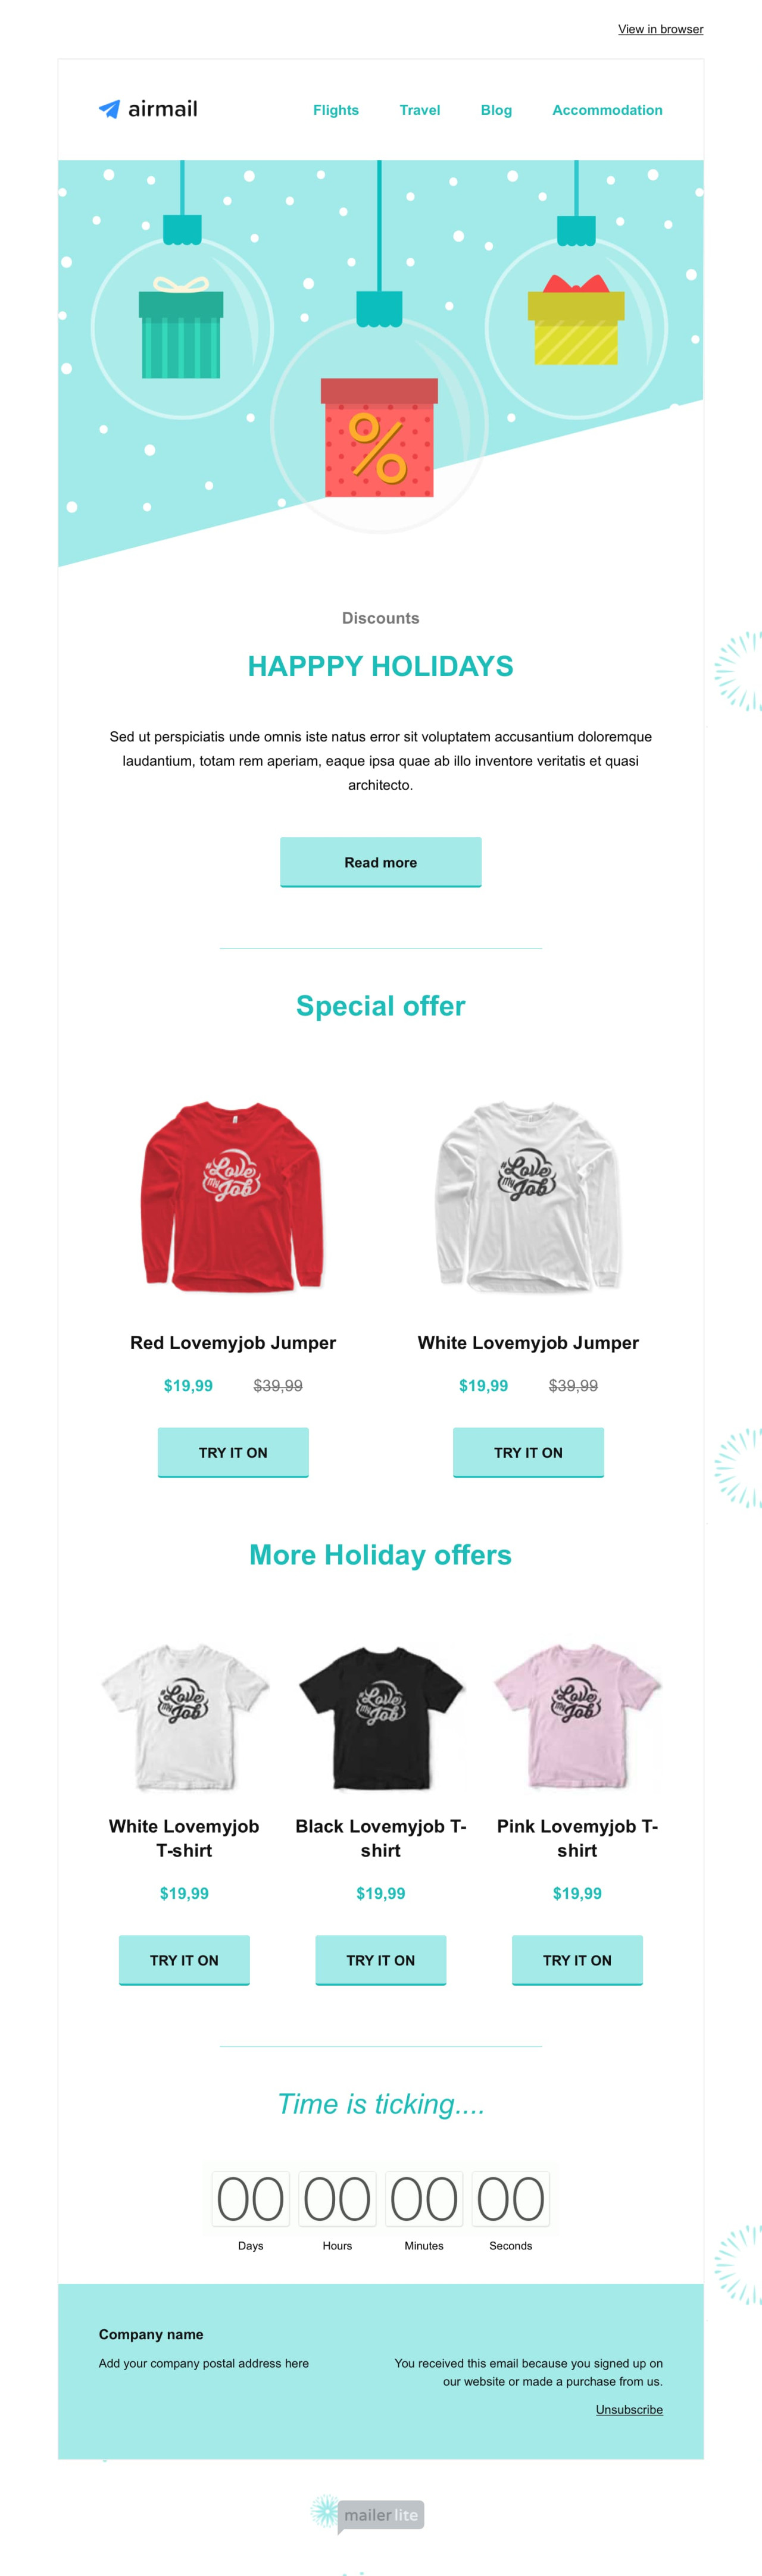 Shopping for christmas presents template - Made by MailerLite